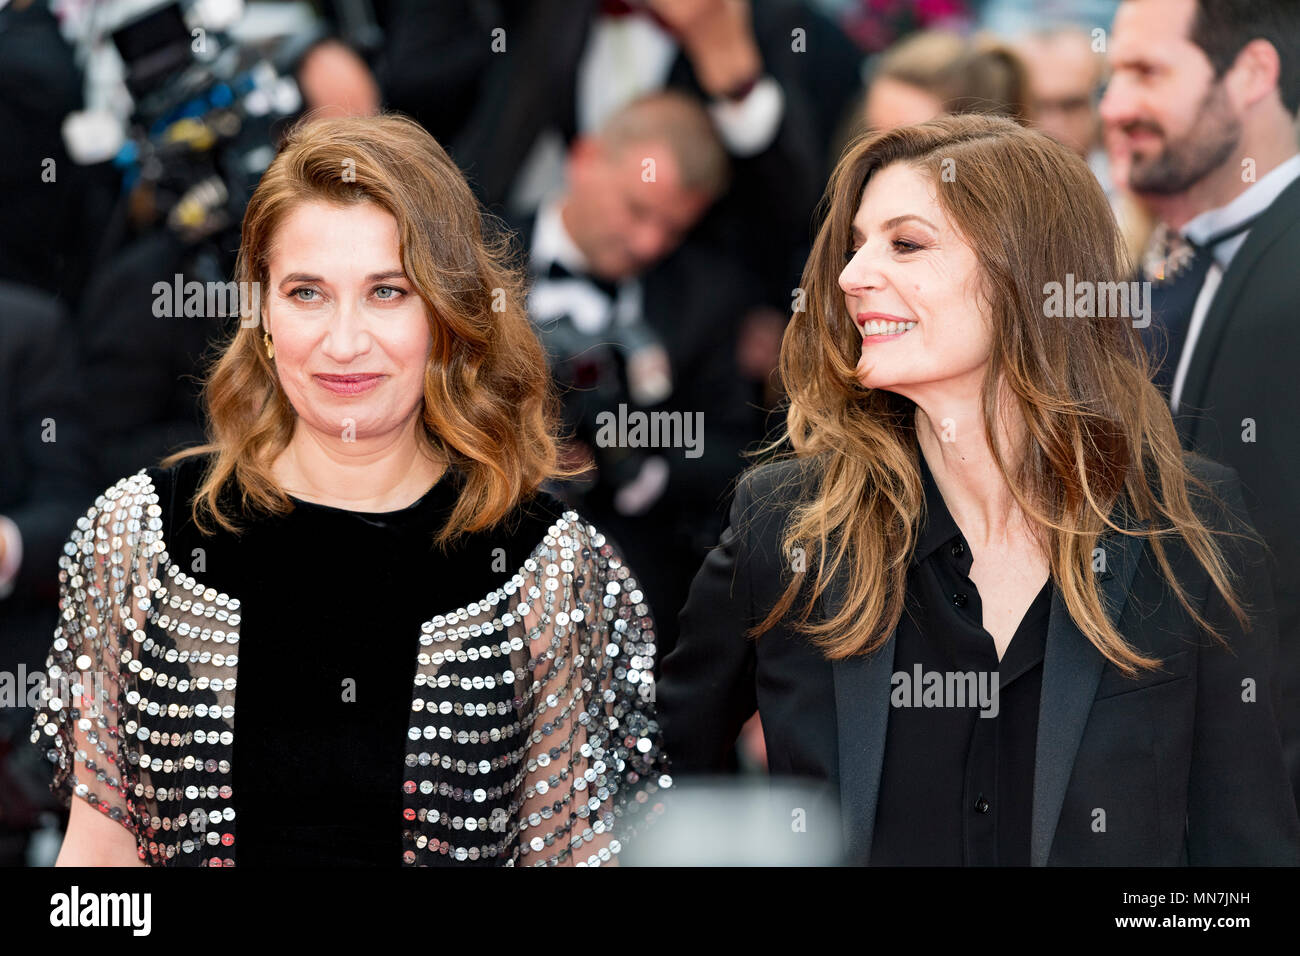 CANNES, FRANCE - MAY 14: Emmanuelle Devos and Chiara Mastroianni attends the screening of 'Blackkklansman' during the 71st annual Cannes Film Festival at Palais des Festivals on May 14, 2018 in Cannes, France Credit: BTWImages/Alamy Live News Stock Photo